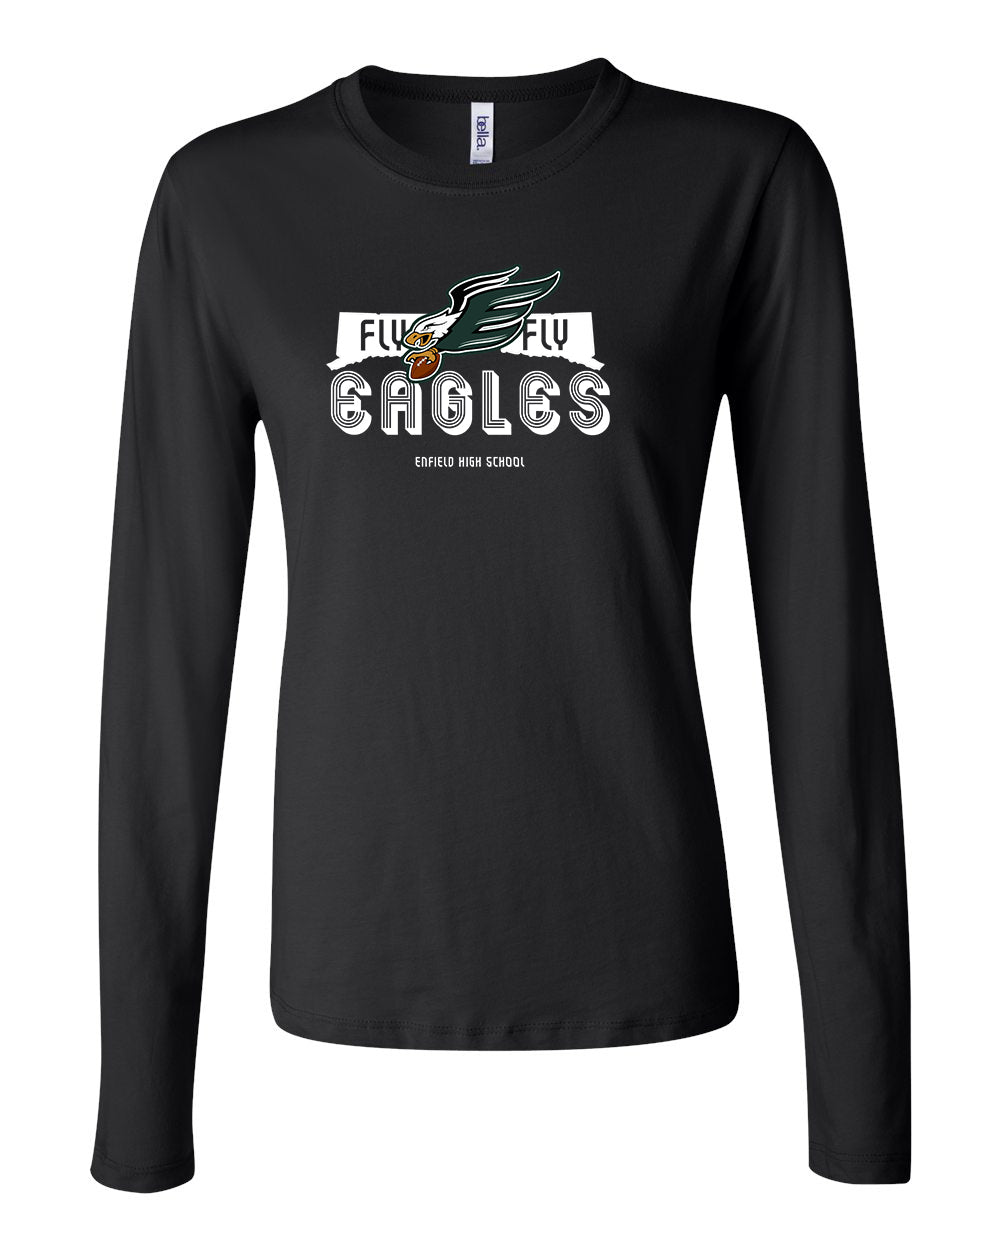 Enfield Eagles Football Womens Longsleeve "Fly"- 6500 (color options available)